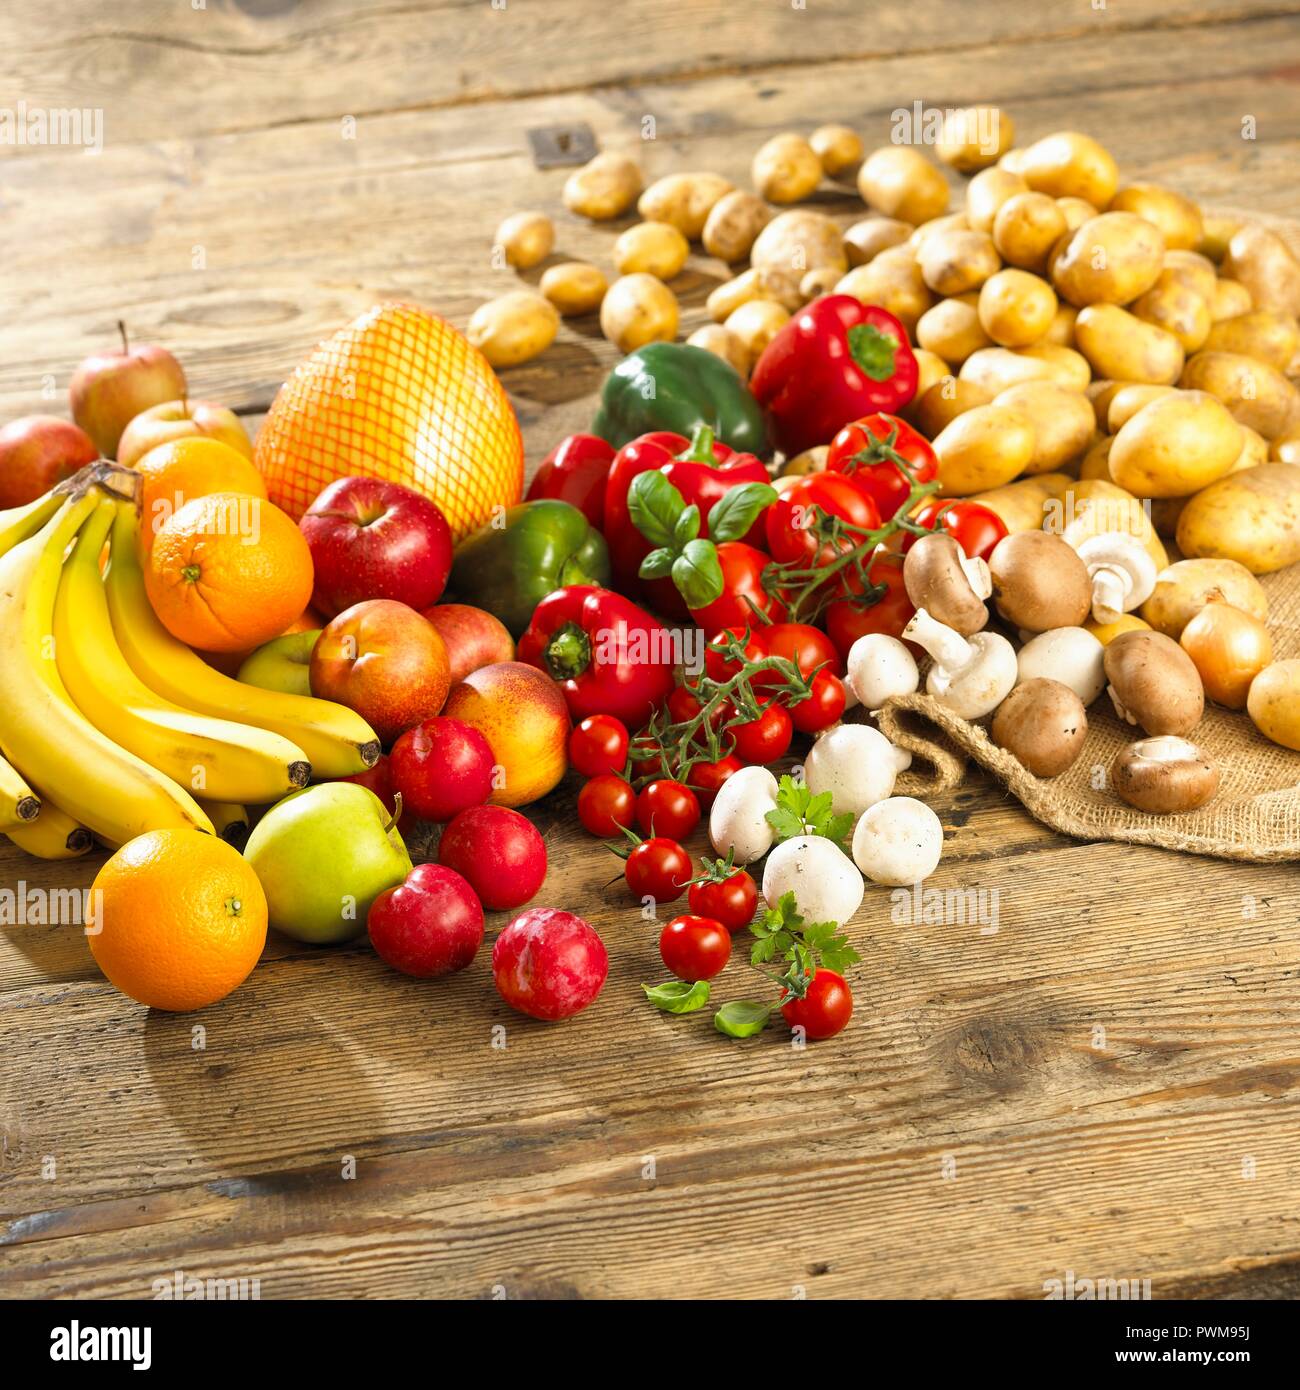 An arrangement of vegetables, mushrooms and fruit on a wooden table Stock Photo